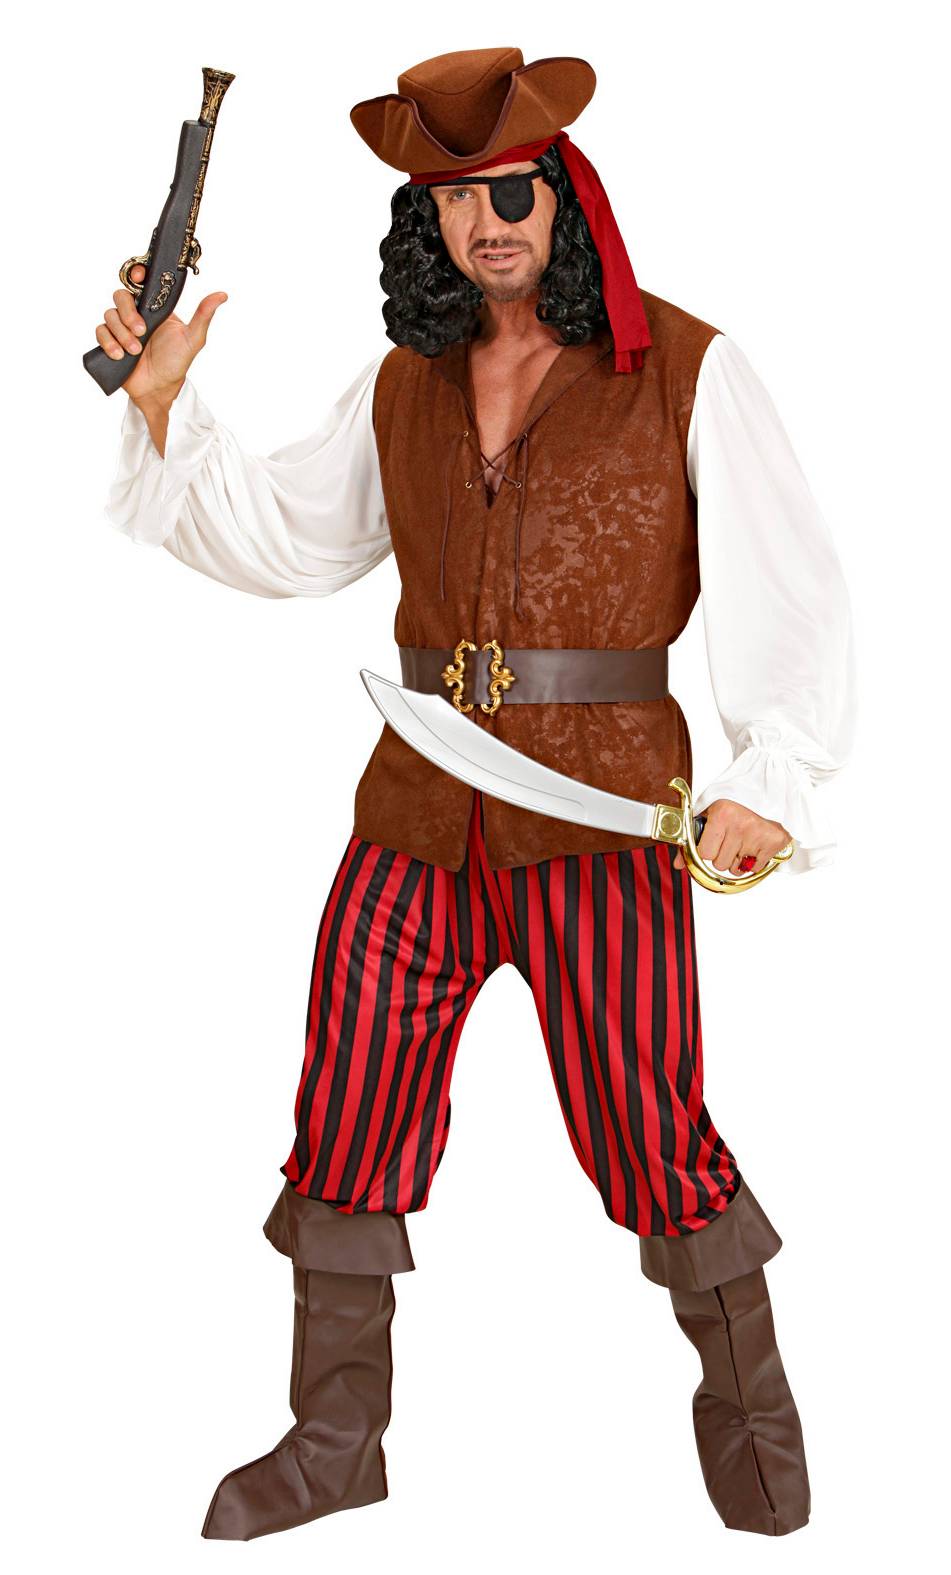 Costume pirate homme